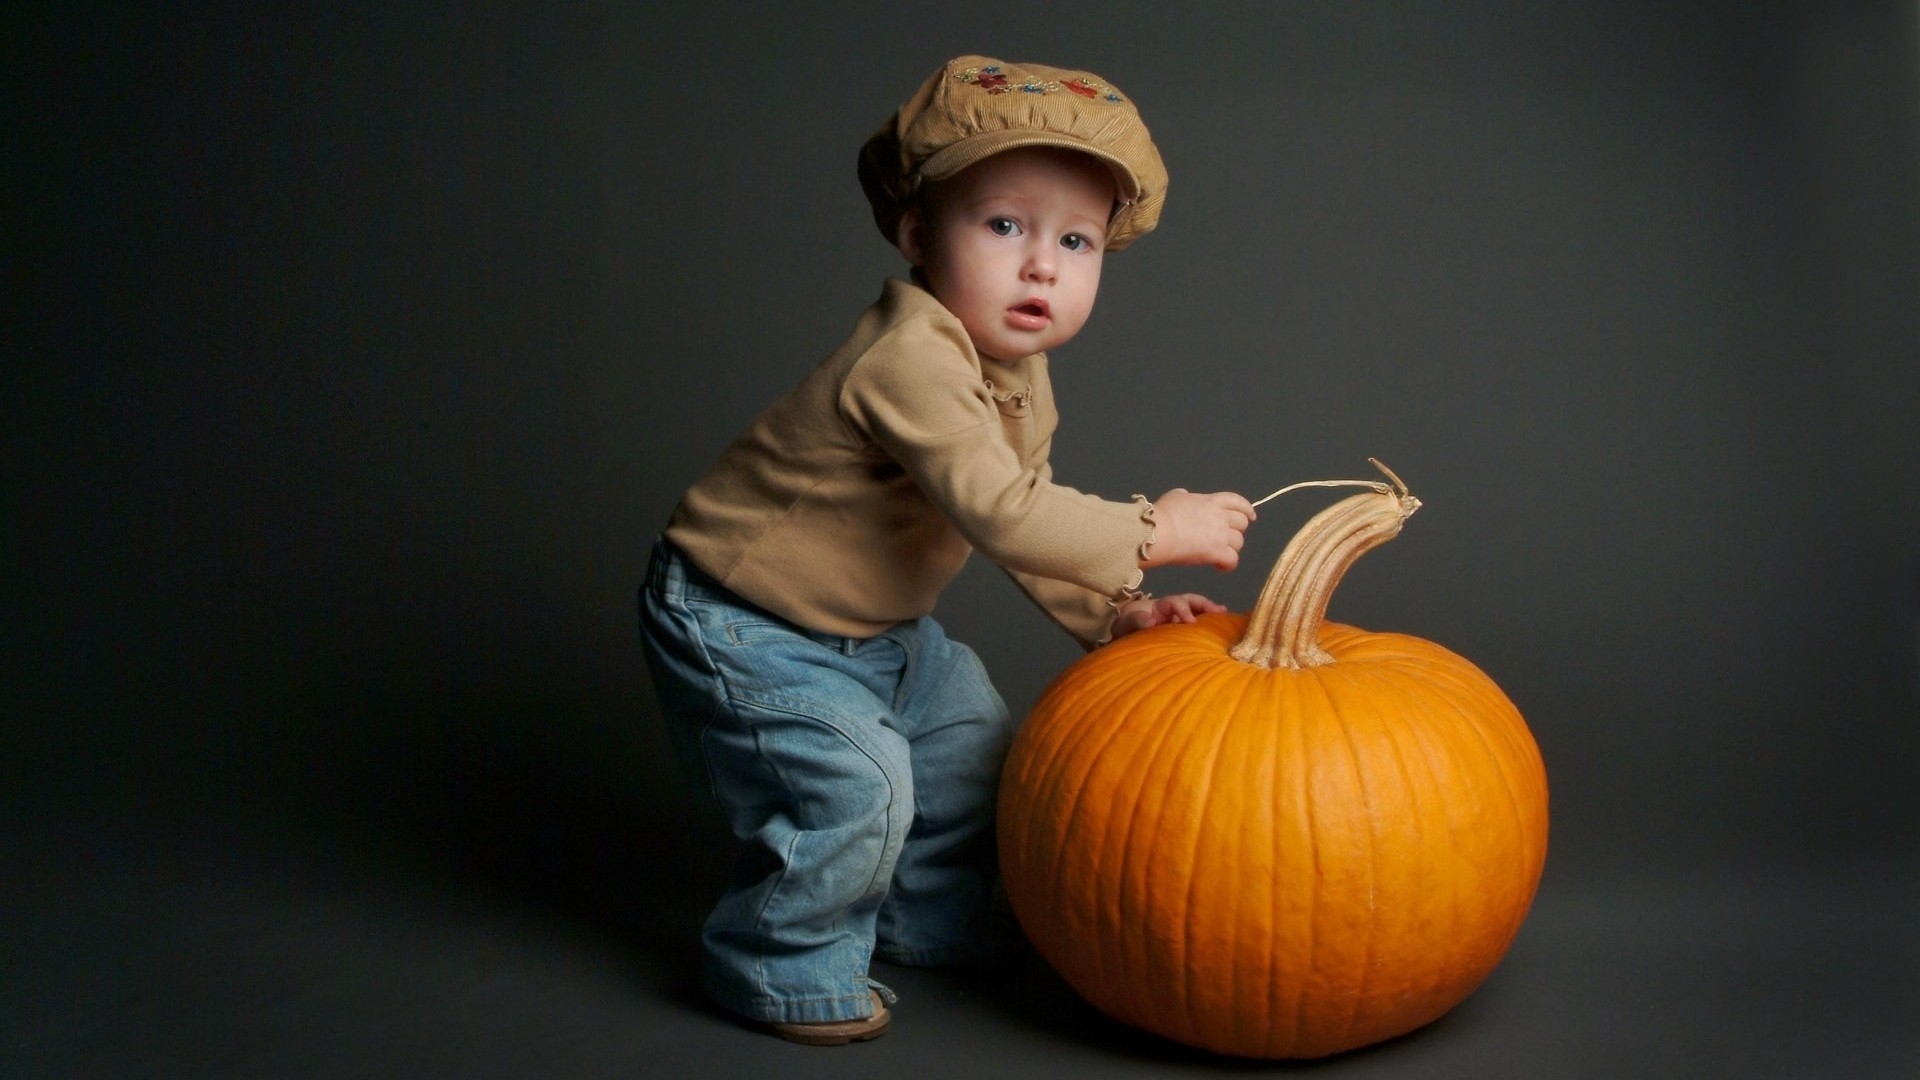 The Boy with Pumpkin for 1920 x 1080 HDTV 1080p resolution